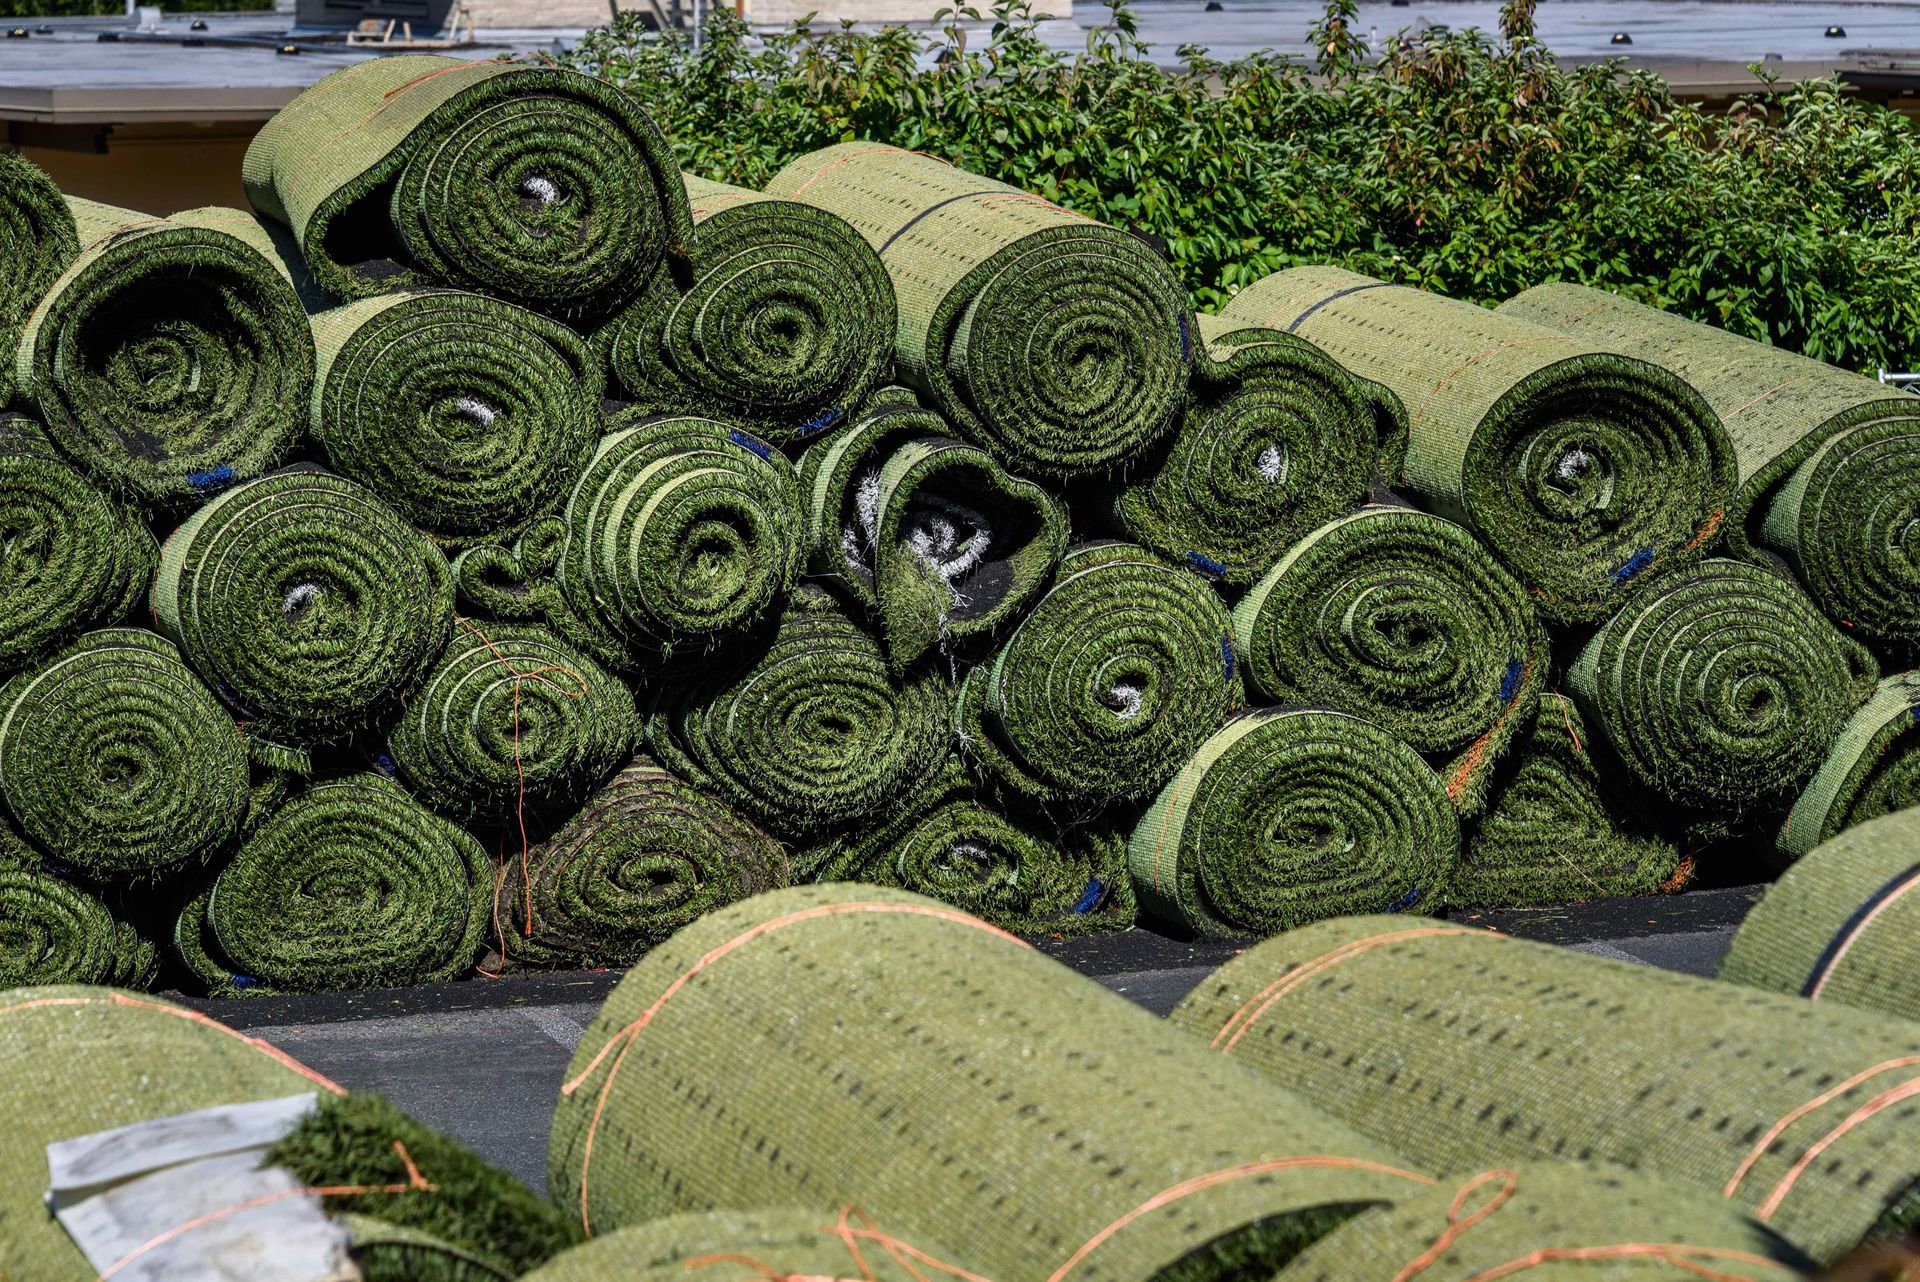 Endless supply of artificial turf rolls ready for installation